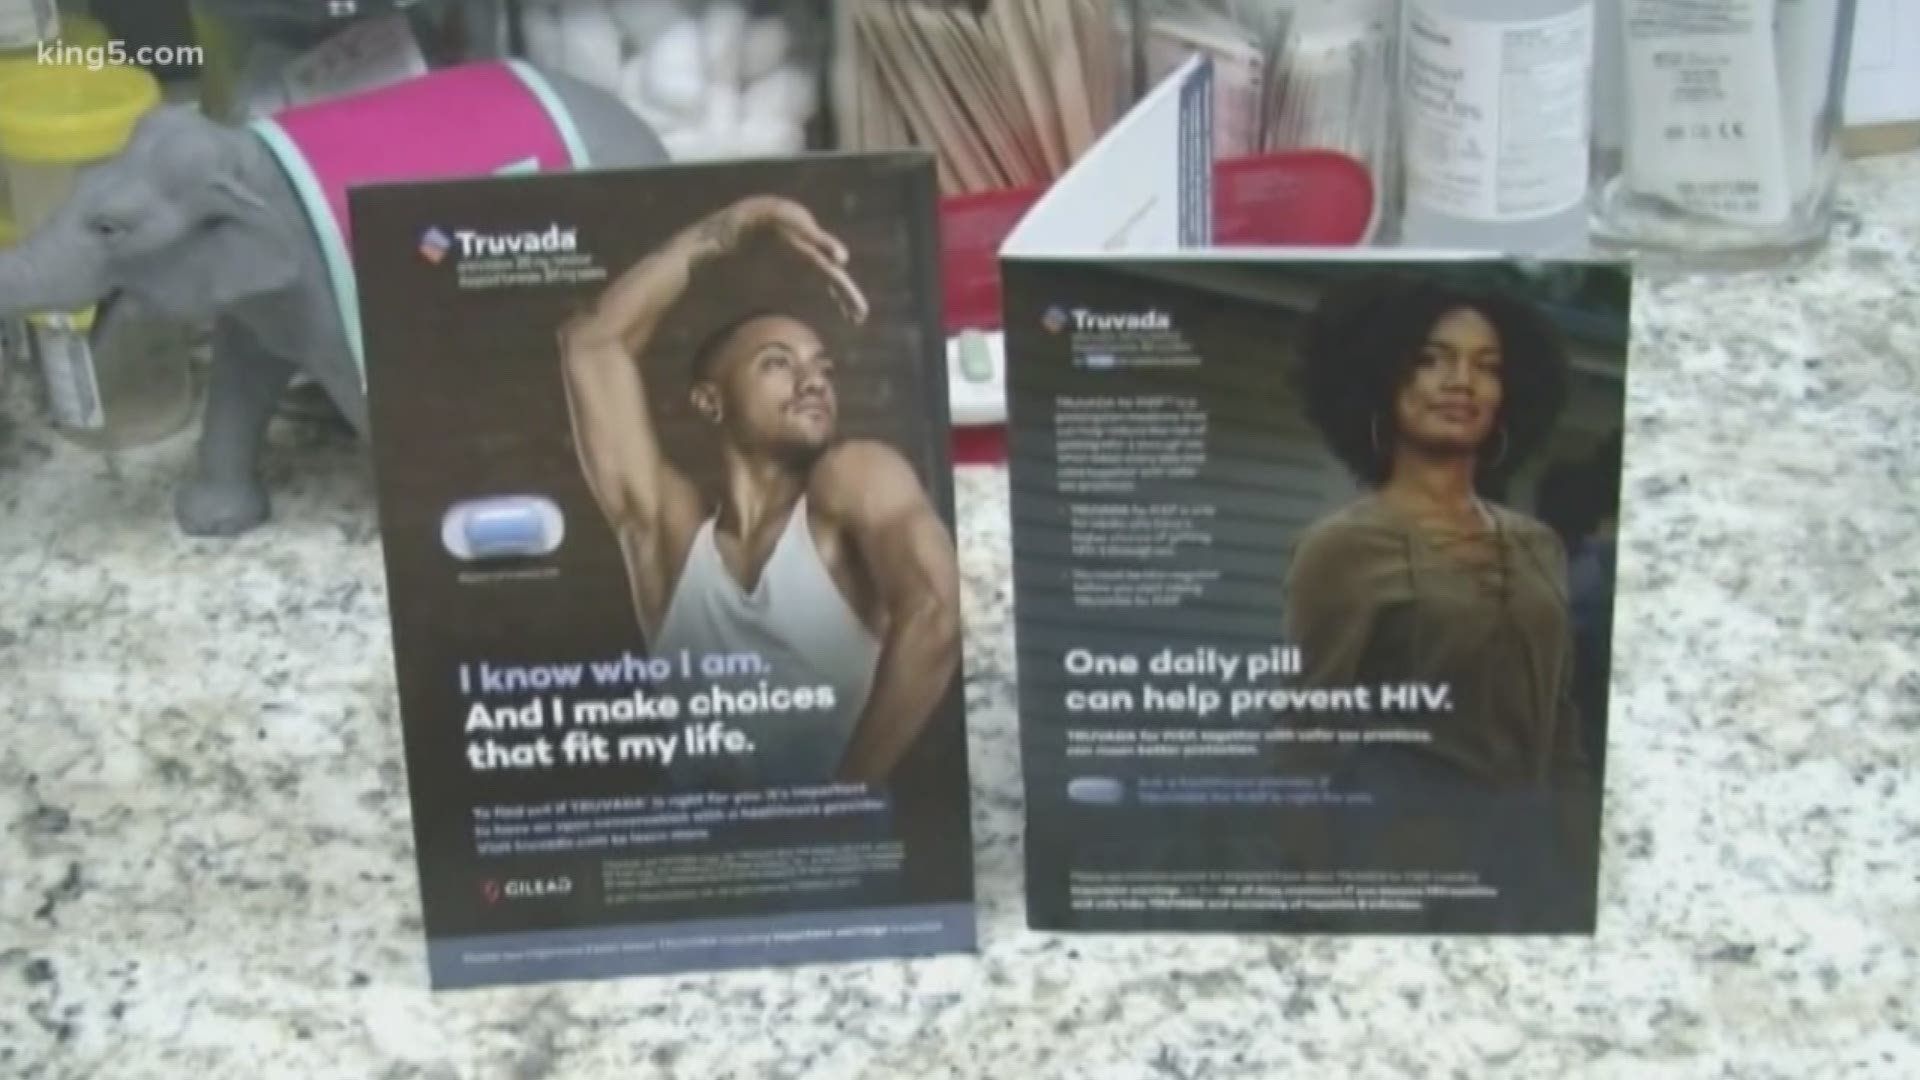 2018 was a big year in the fight against HIV. Doctors who treat the virus say we have come a long way in prevention and treatment, but still have work to do. KING 5's Amity Addrisi has details in Healthlink.